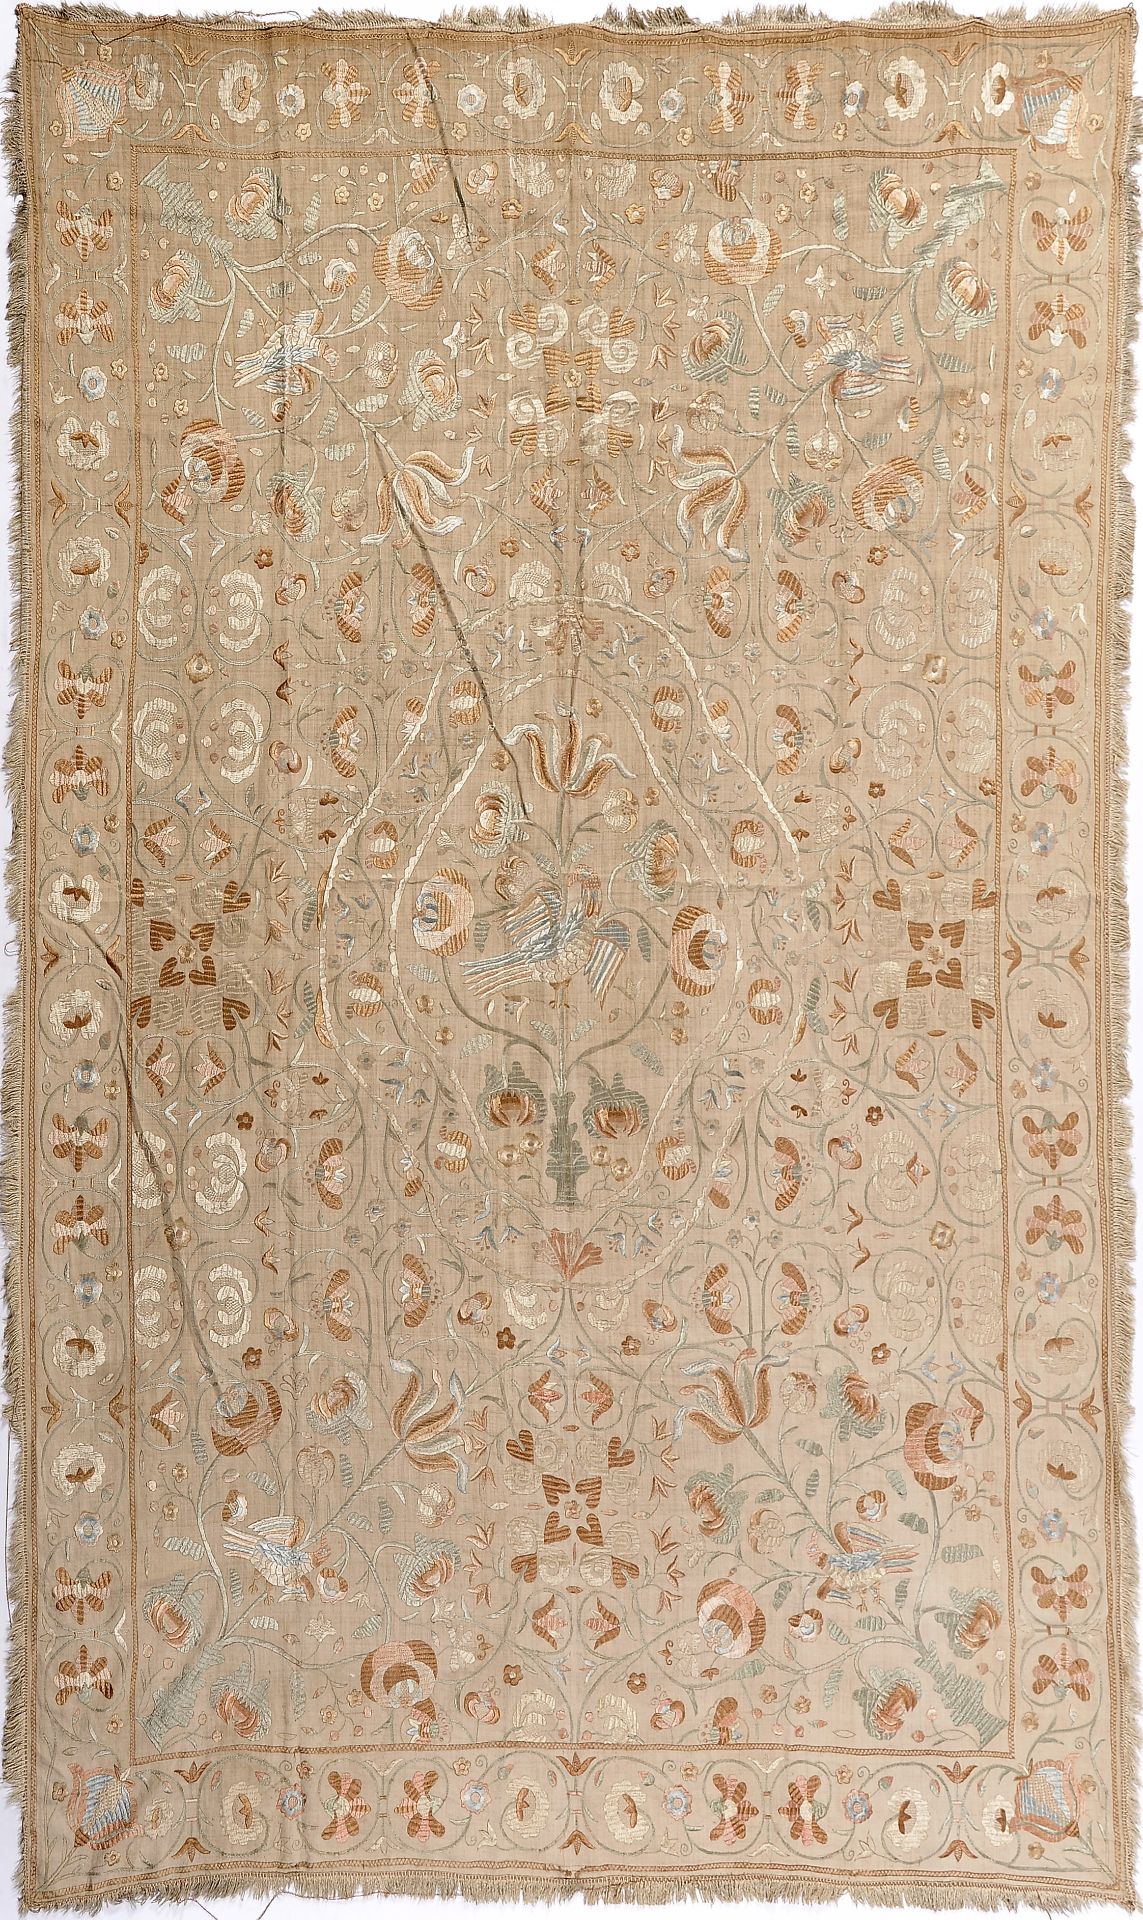 A coverlet